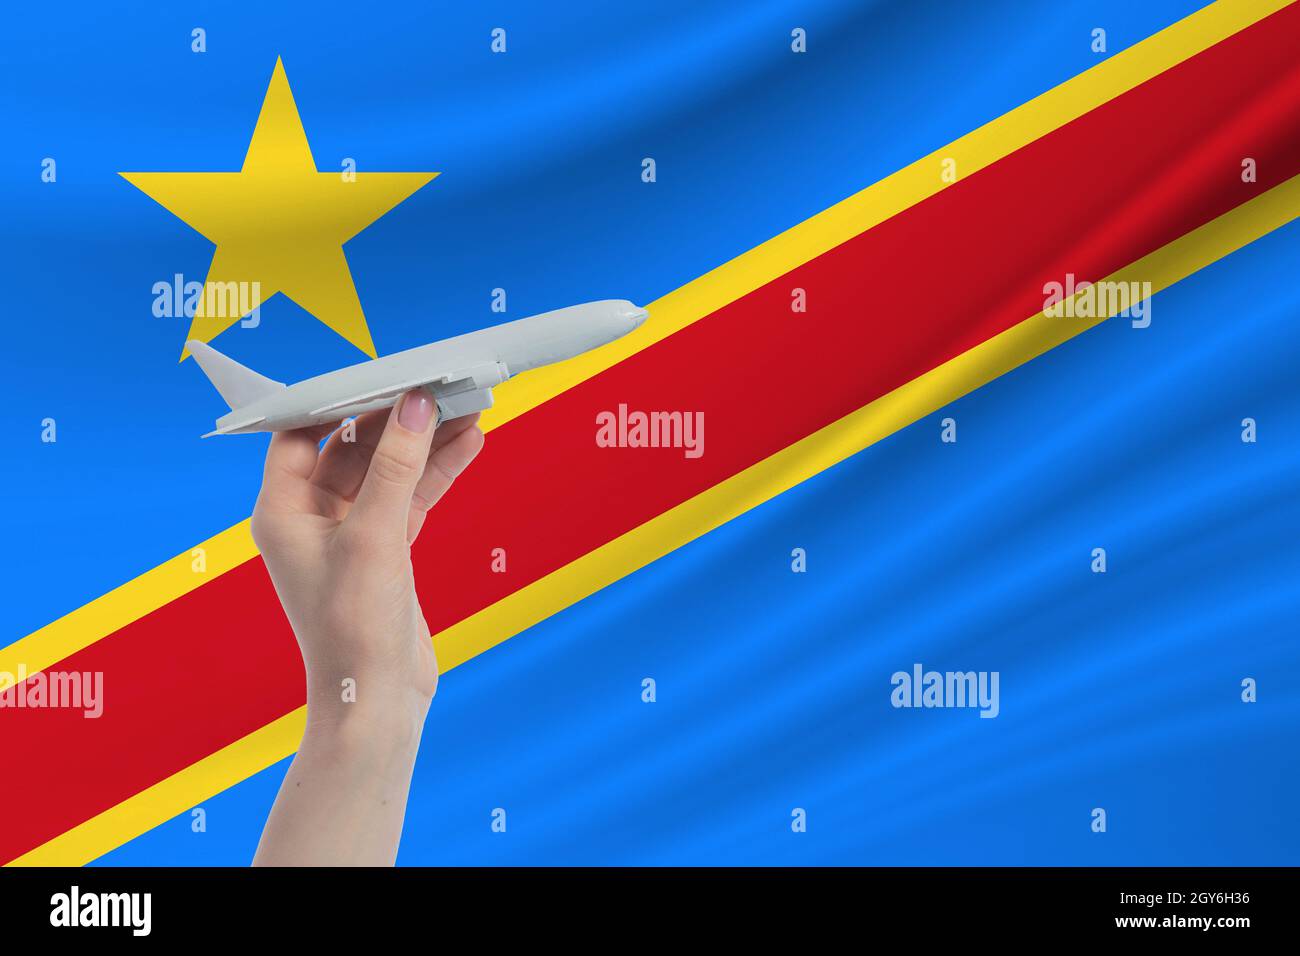 Airplane in hand with national flag of Democratic Republic of the Congo Travel to Democratic Republic of the Congo. Stock Photo